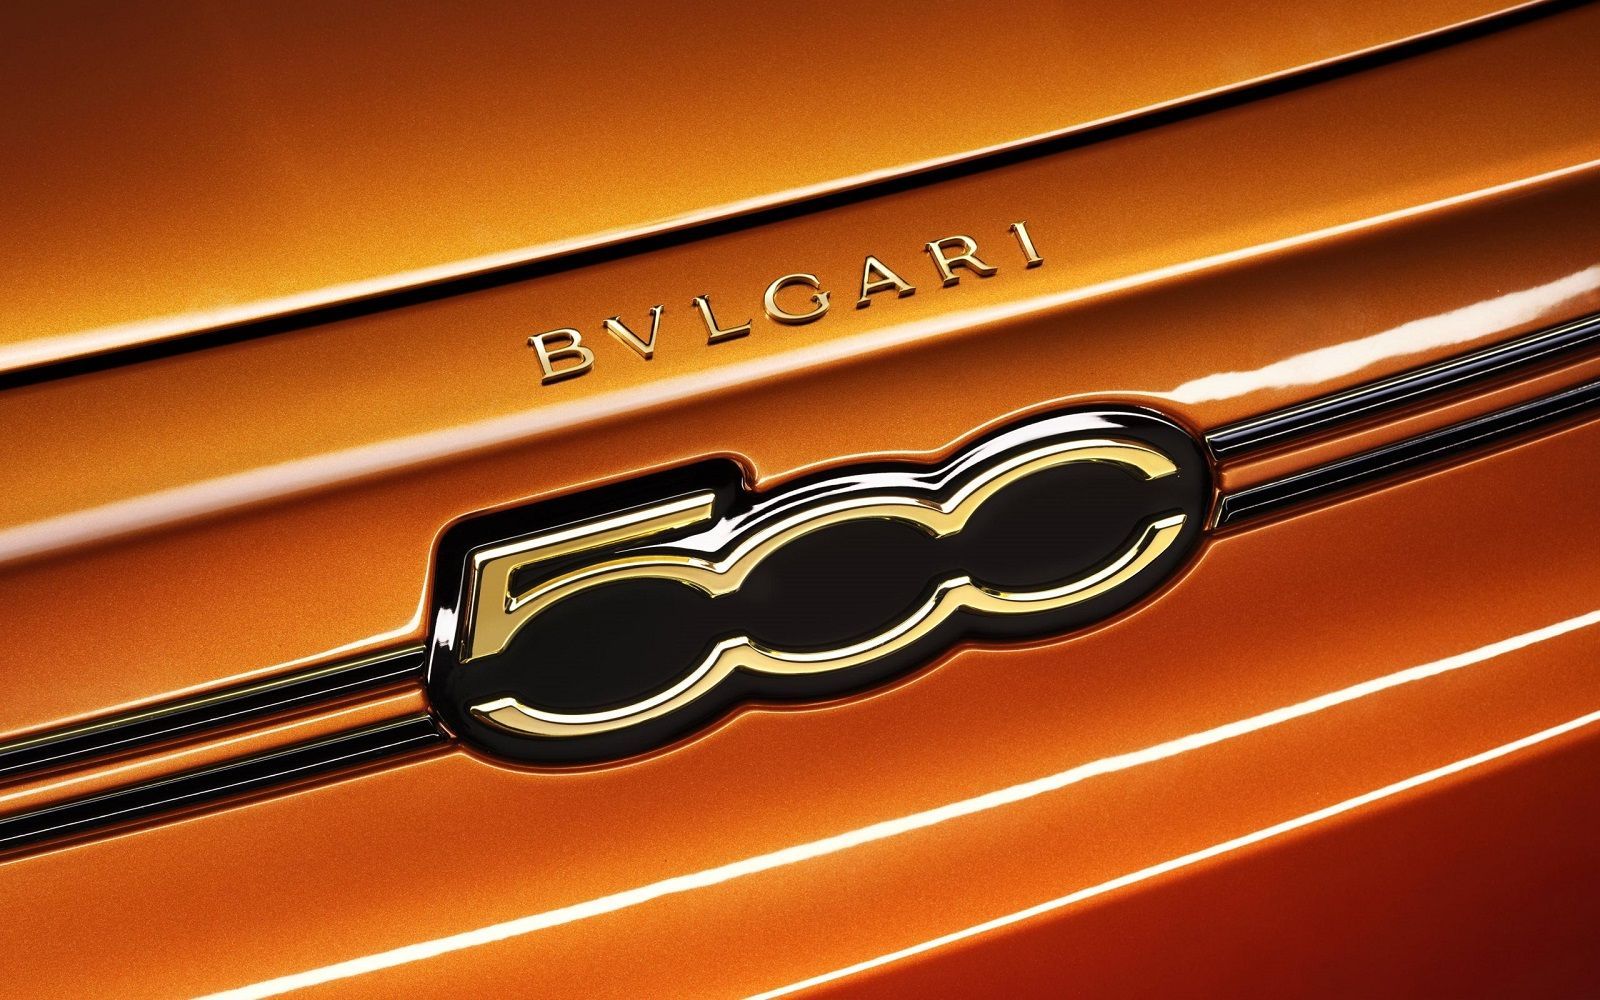 The Fiat 500 signed Bulgari It will be auctioned and the proceeds donated to Leonardo DiCaprio's environmental organizations